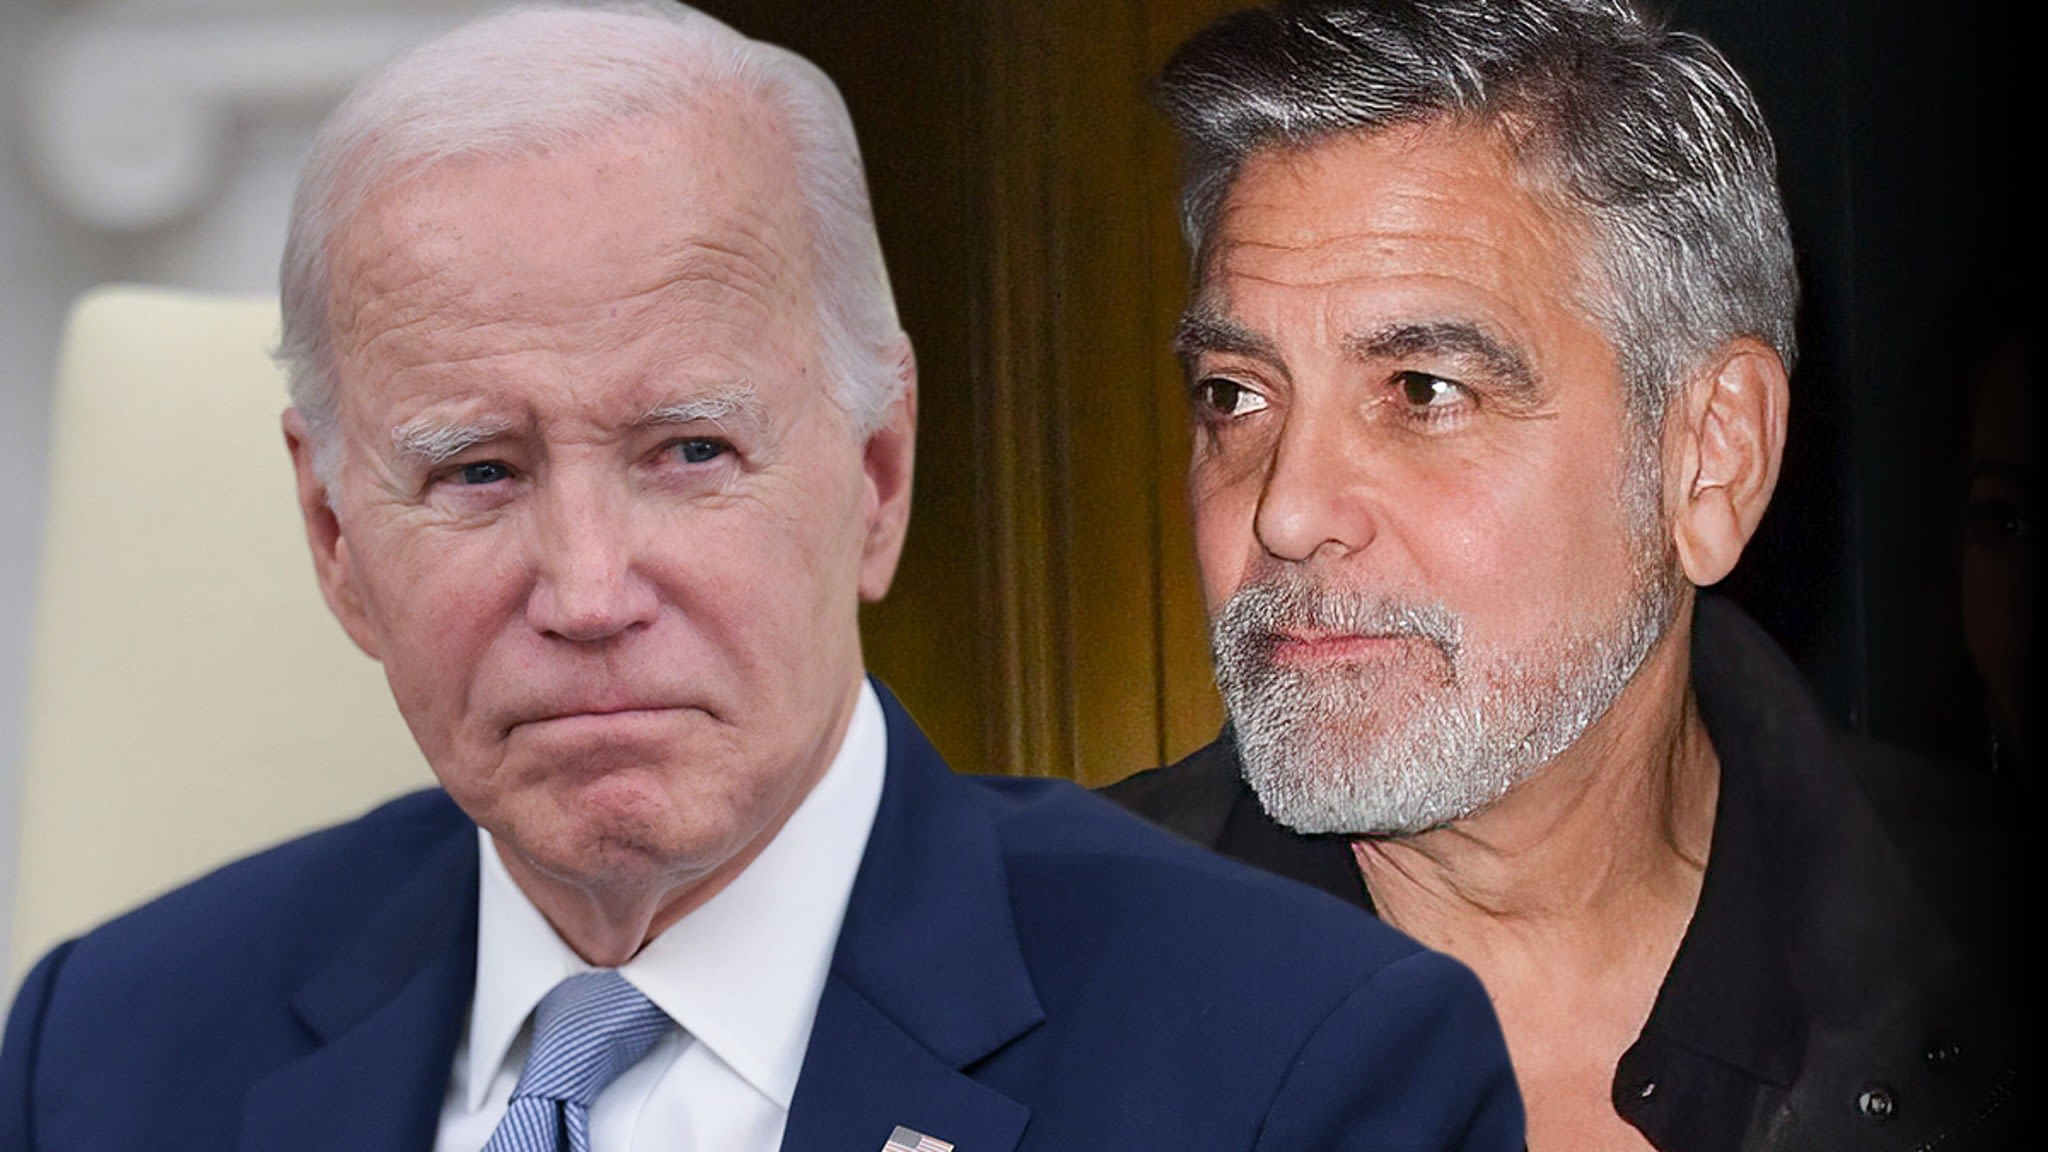 George Clooney Forced Biden to Change Fundraiser Date, Says Campaign Source